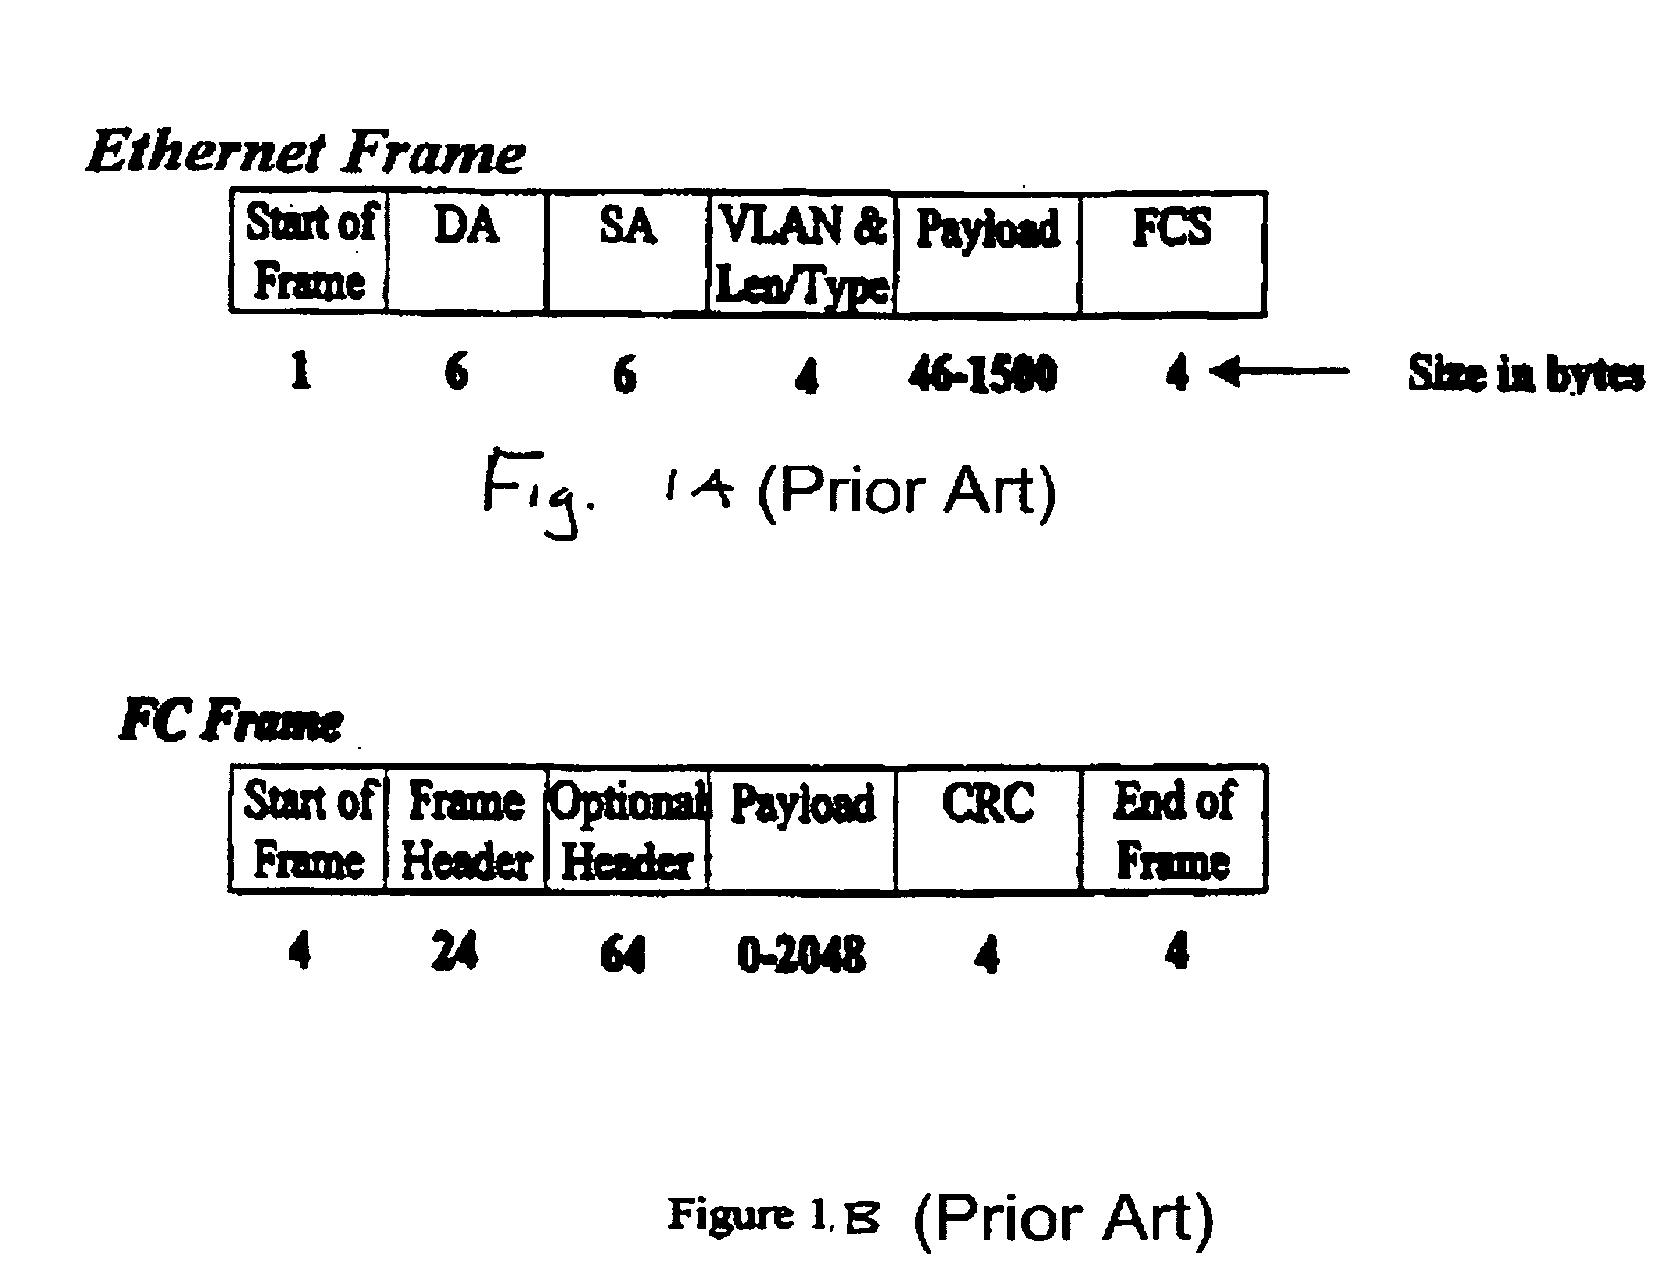 Protocol stack for linking storage area networks over an existing LAN, MAN, or WAN